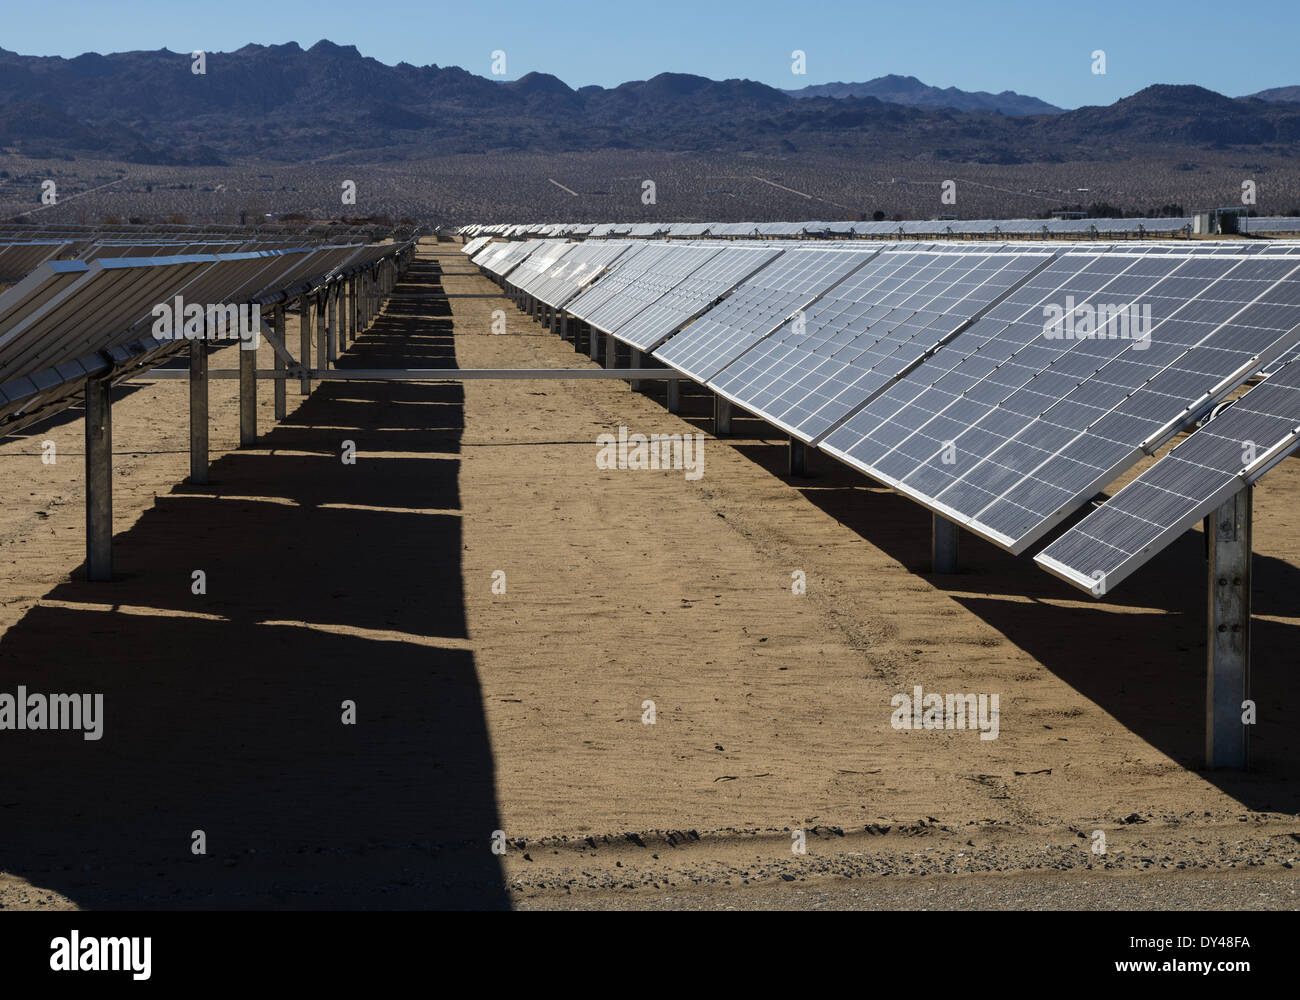 photovoltaic solar electric power plant with tracking panels in the desert Stock Photo